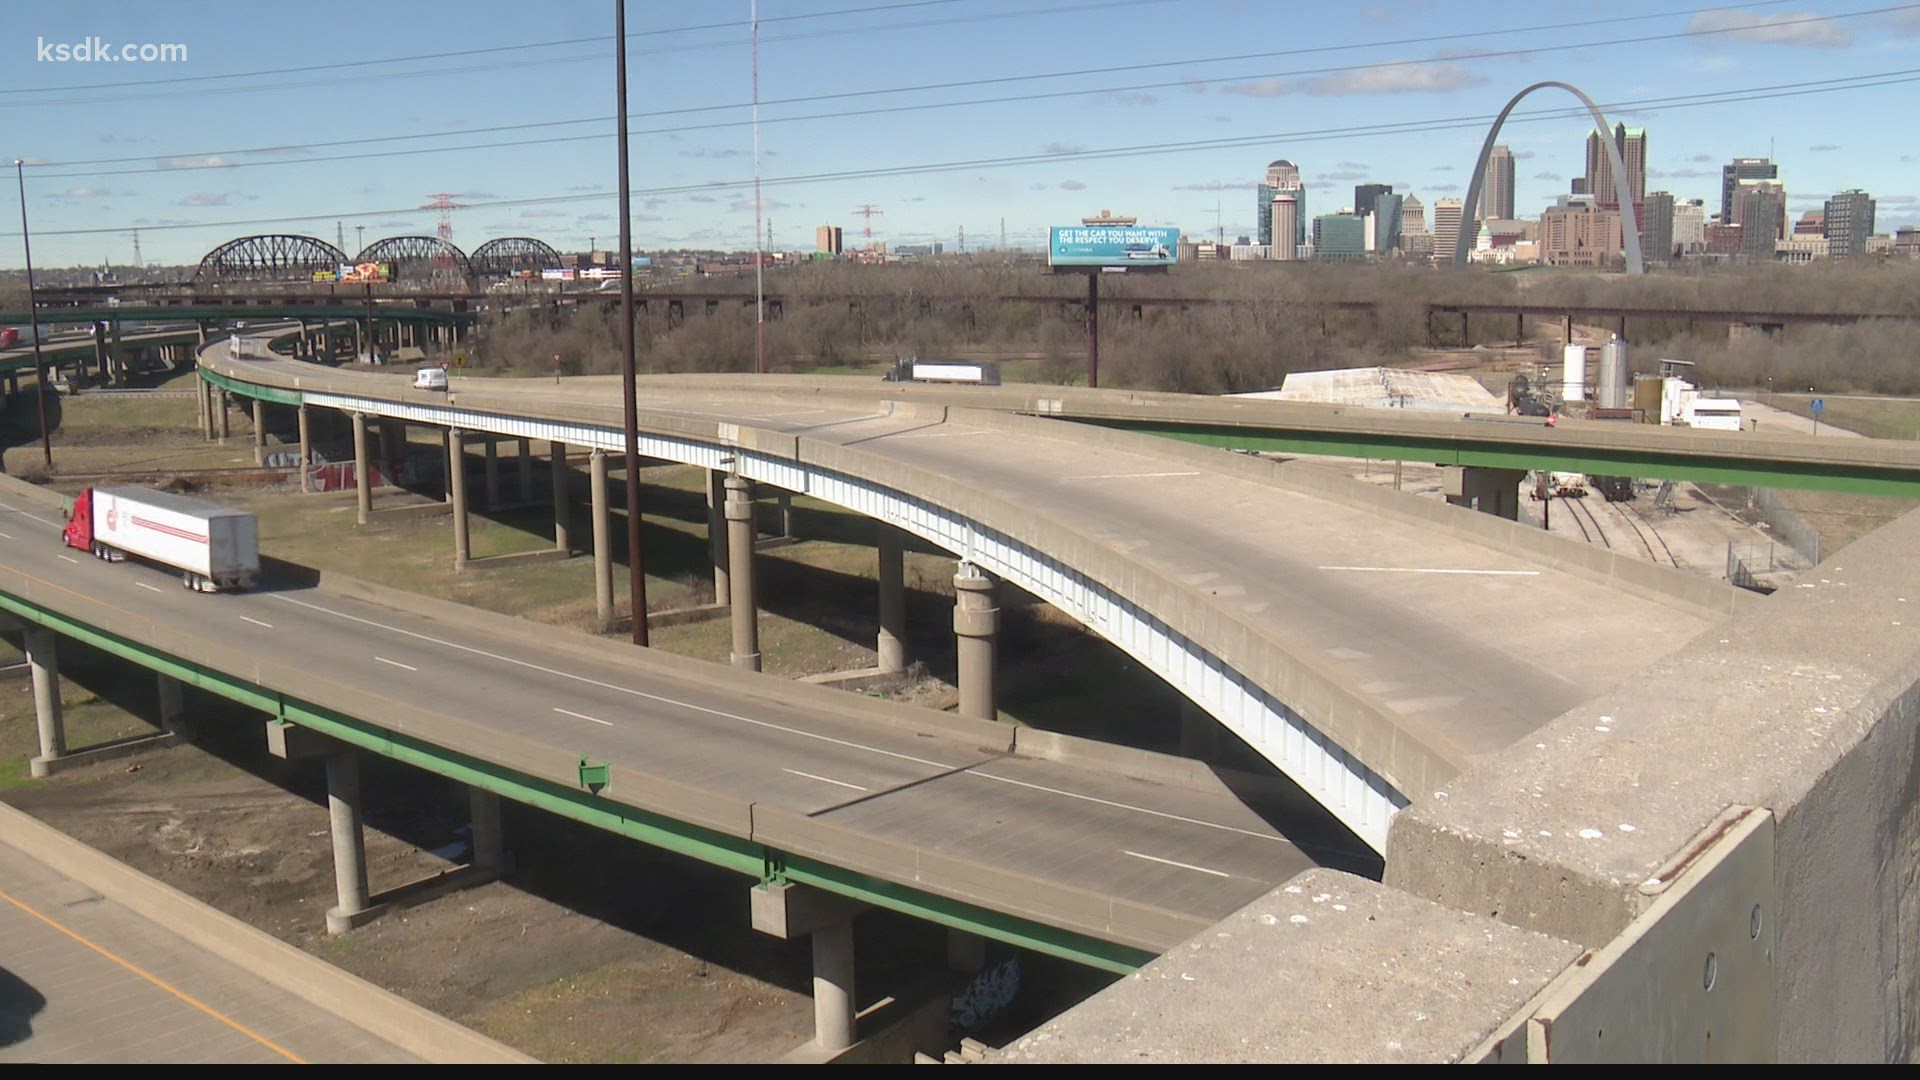 The Illinois Department of Transportation says lanes are going to be closing on the bridge starting next week